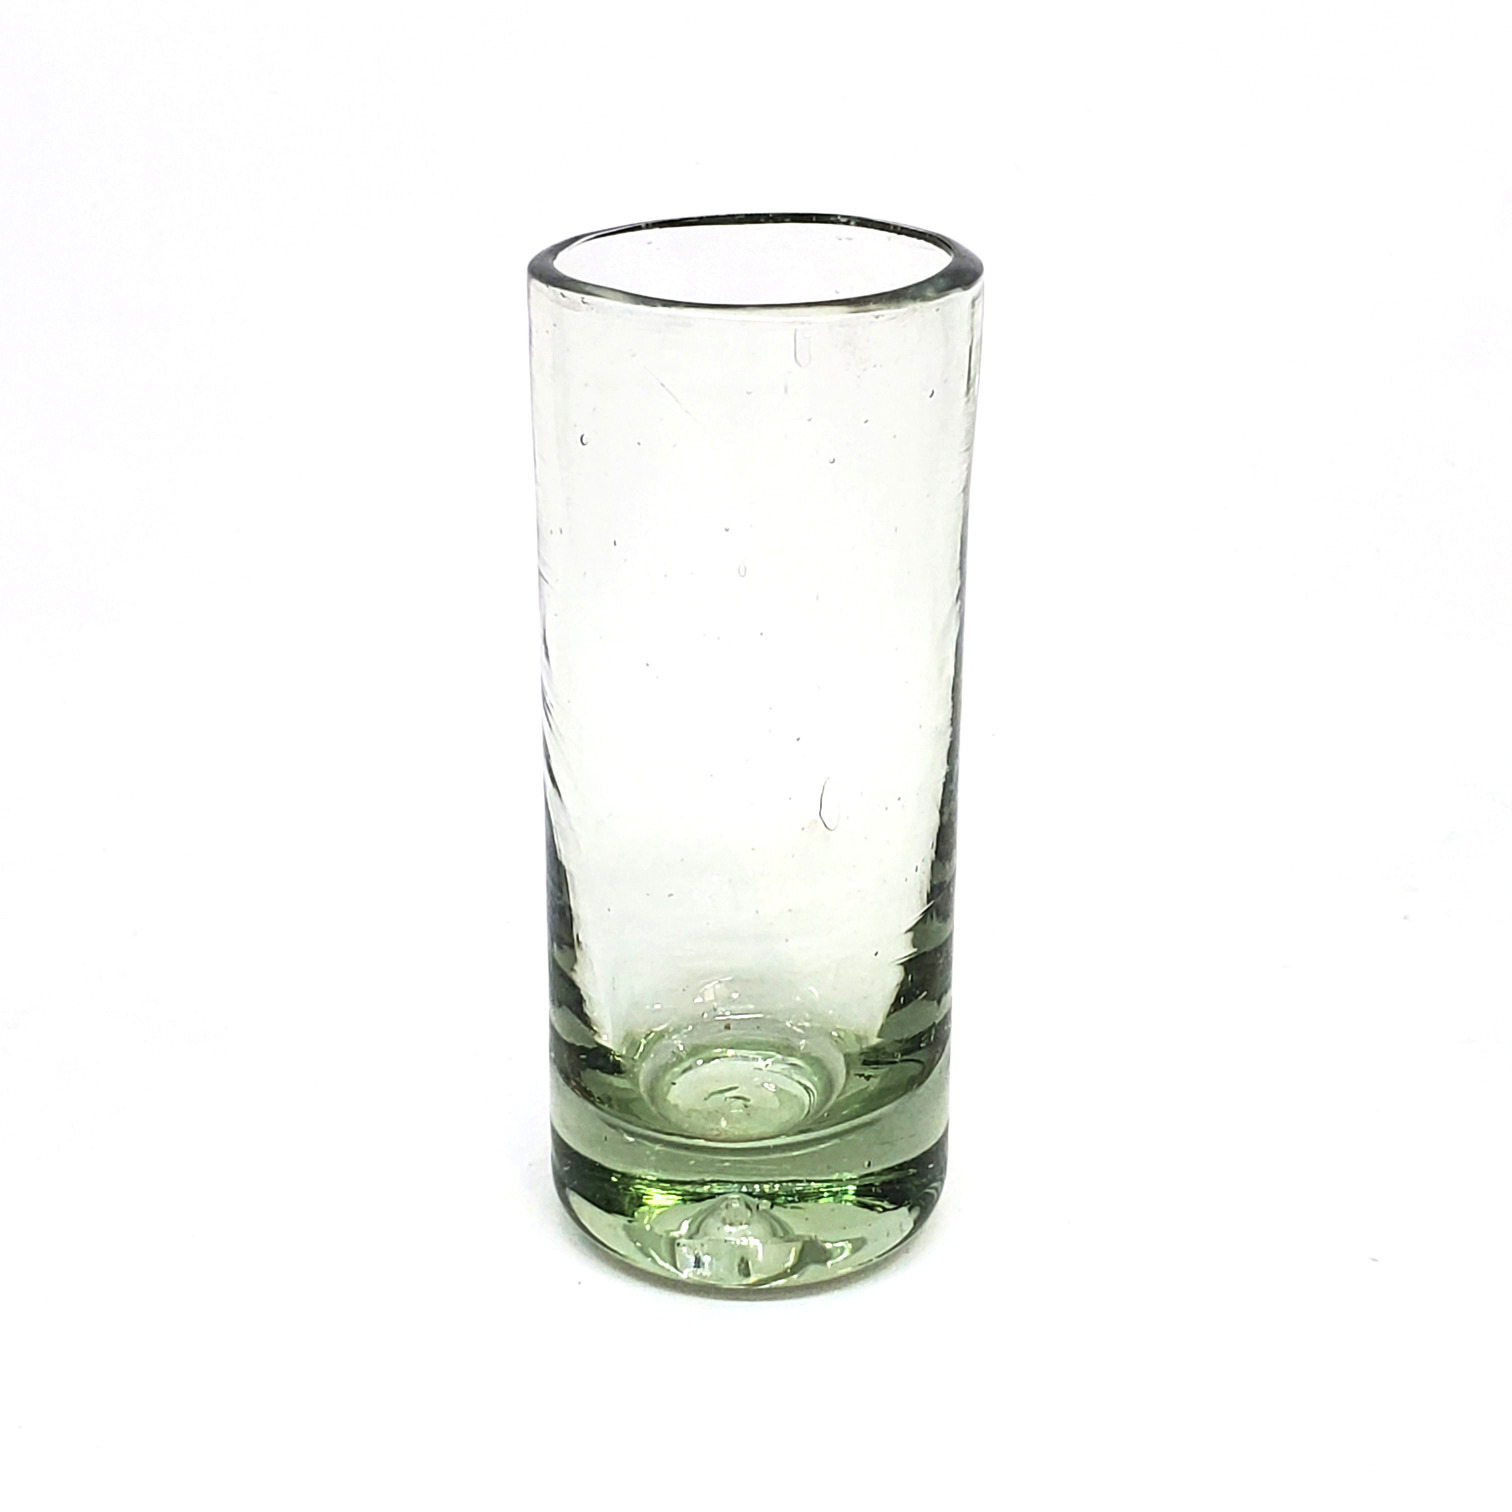 Colored Glassware / Clear 2 oz Tequila Shot Glasses (set of 6) / Sip your favourite tequila or mezcal with these iconic clear handcrafted shot glasses.